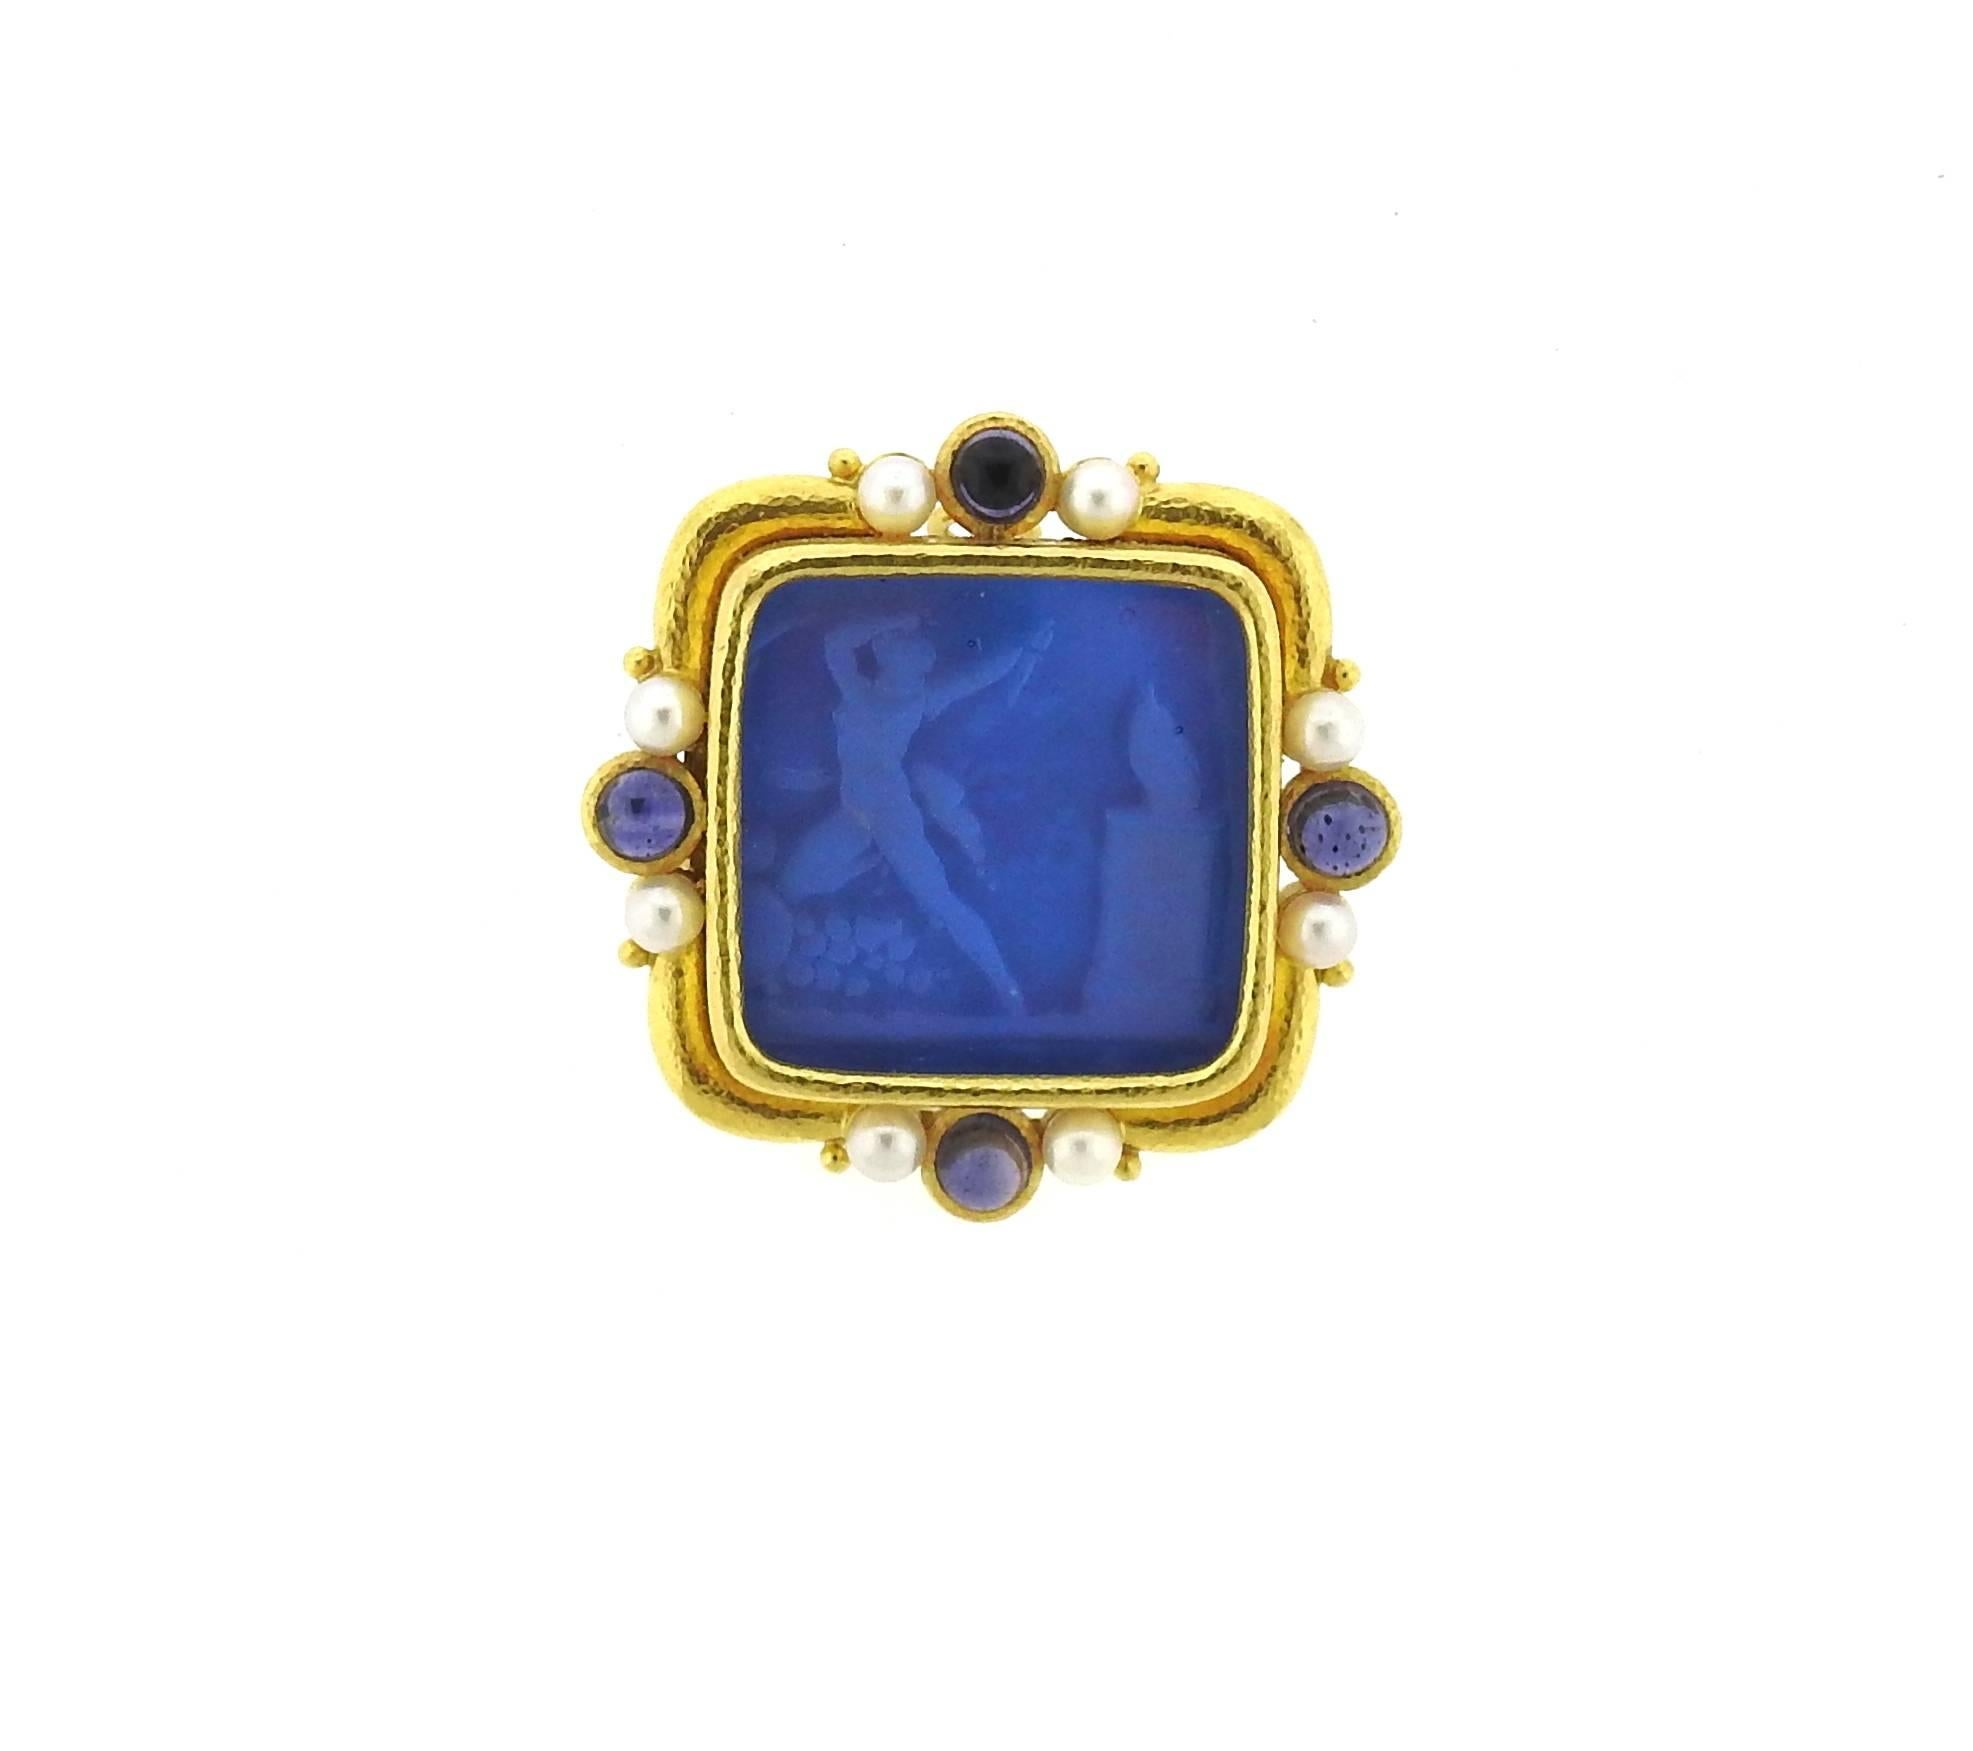 An 18k yellow gold brooch, designed by Elizabeth Locke, featuring Venetian glass intaglio, backed with mother of pearl, surrounded with pearls and blue sapphire cabochons. Brooch has a hidden bale to be worn as a pendant, measures 42mm x 42mm.